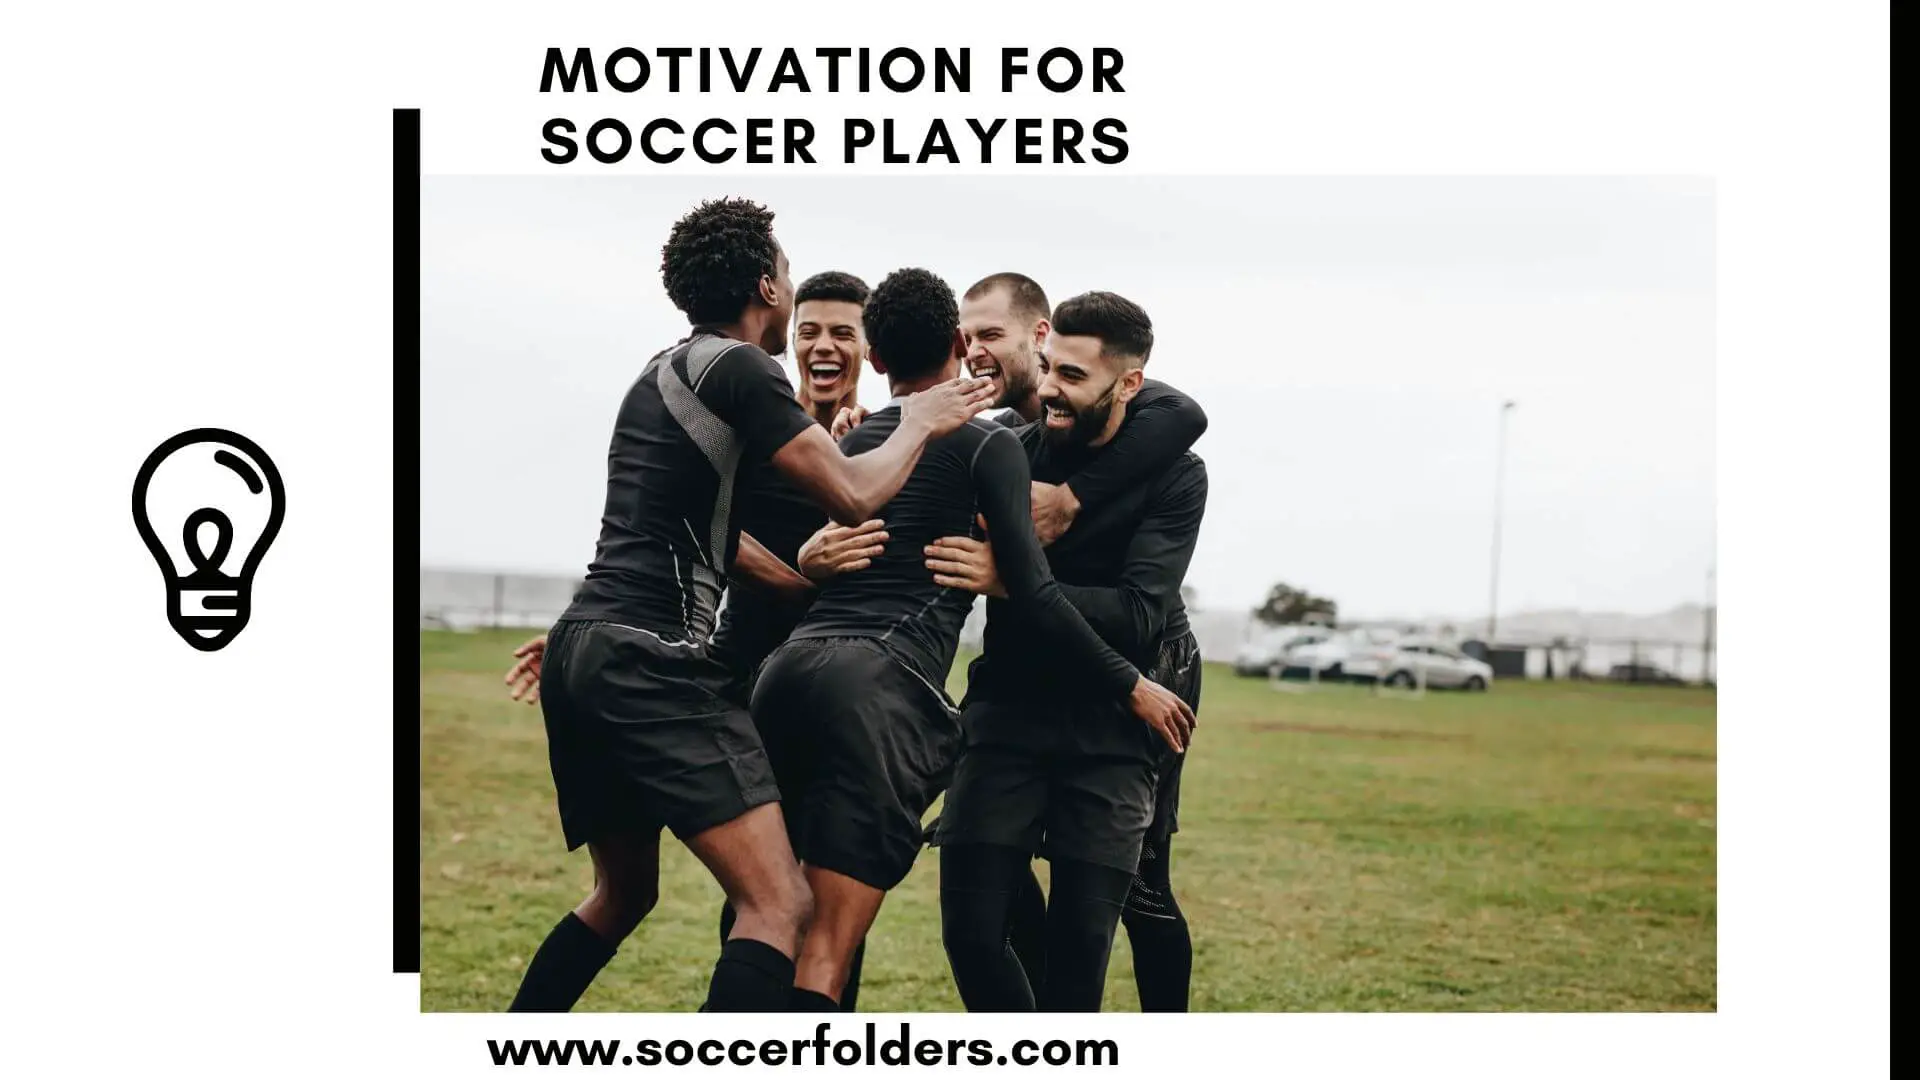 Motivation for soccer players - Featured Image